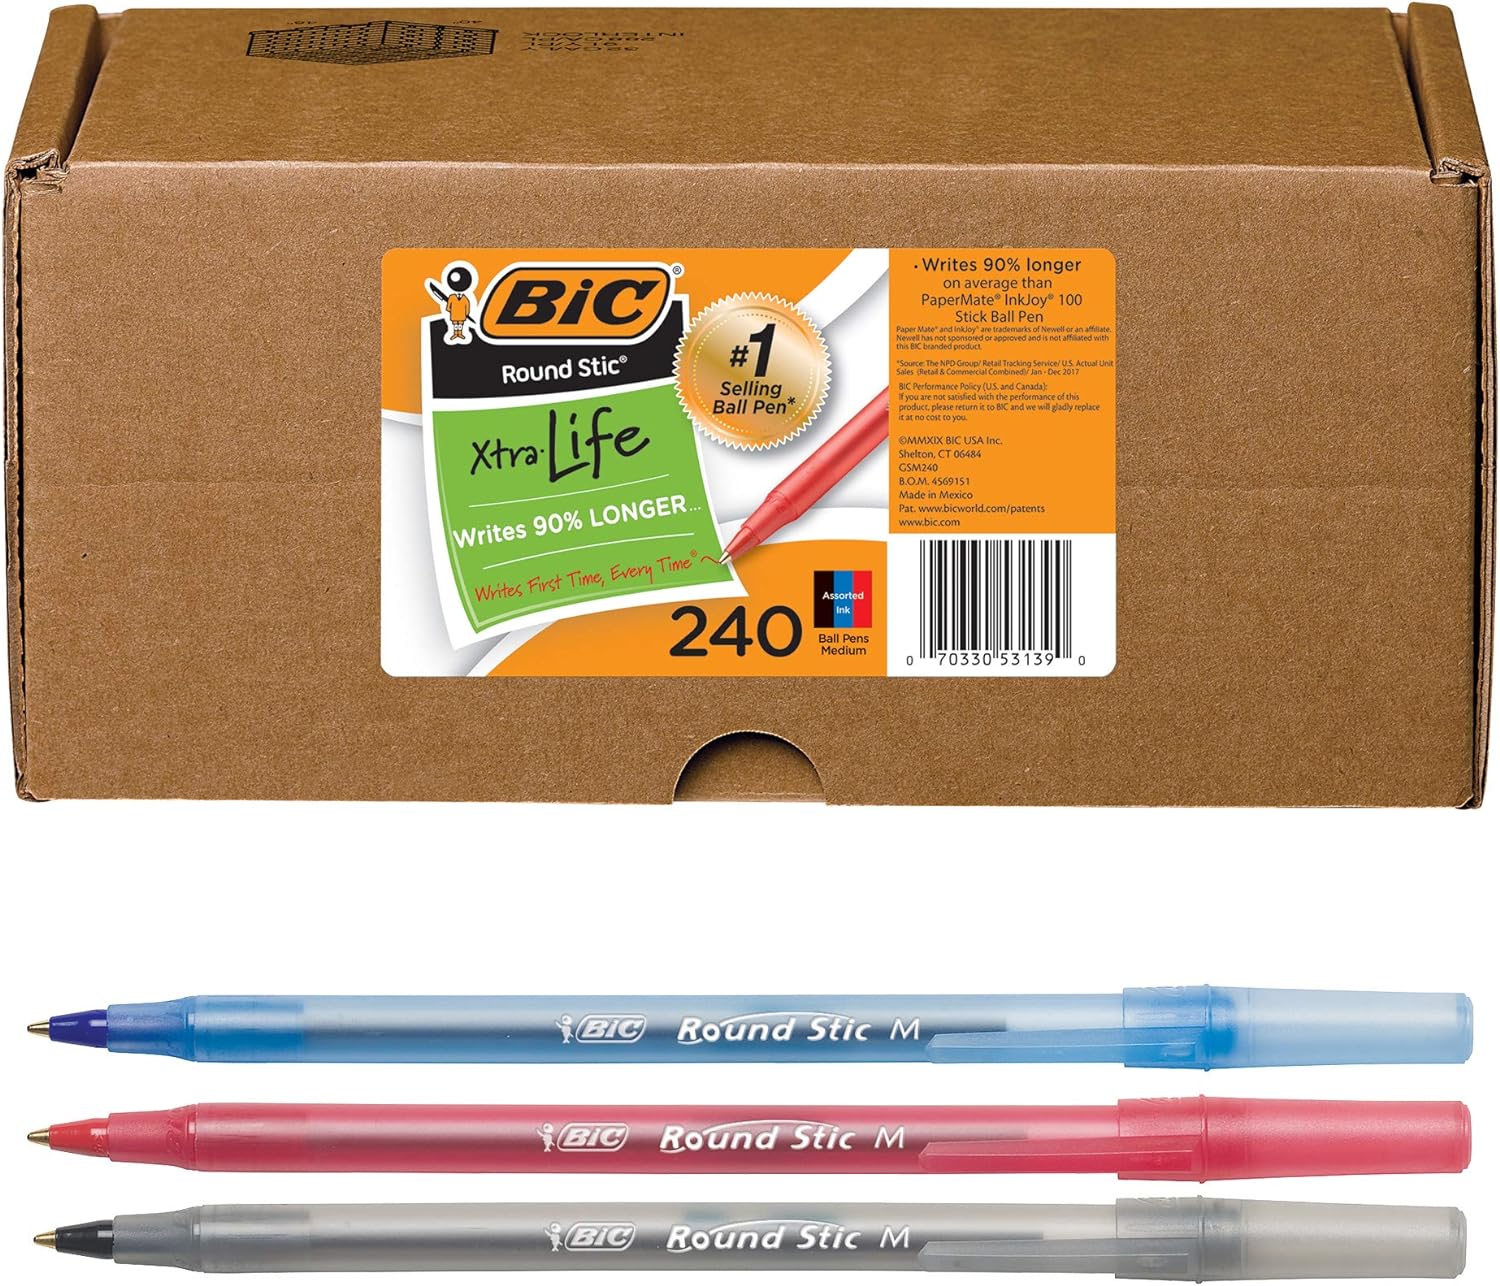 BIC Round Stic Xtra Life Ball Point Pen, Assorted, 240 Pack